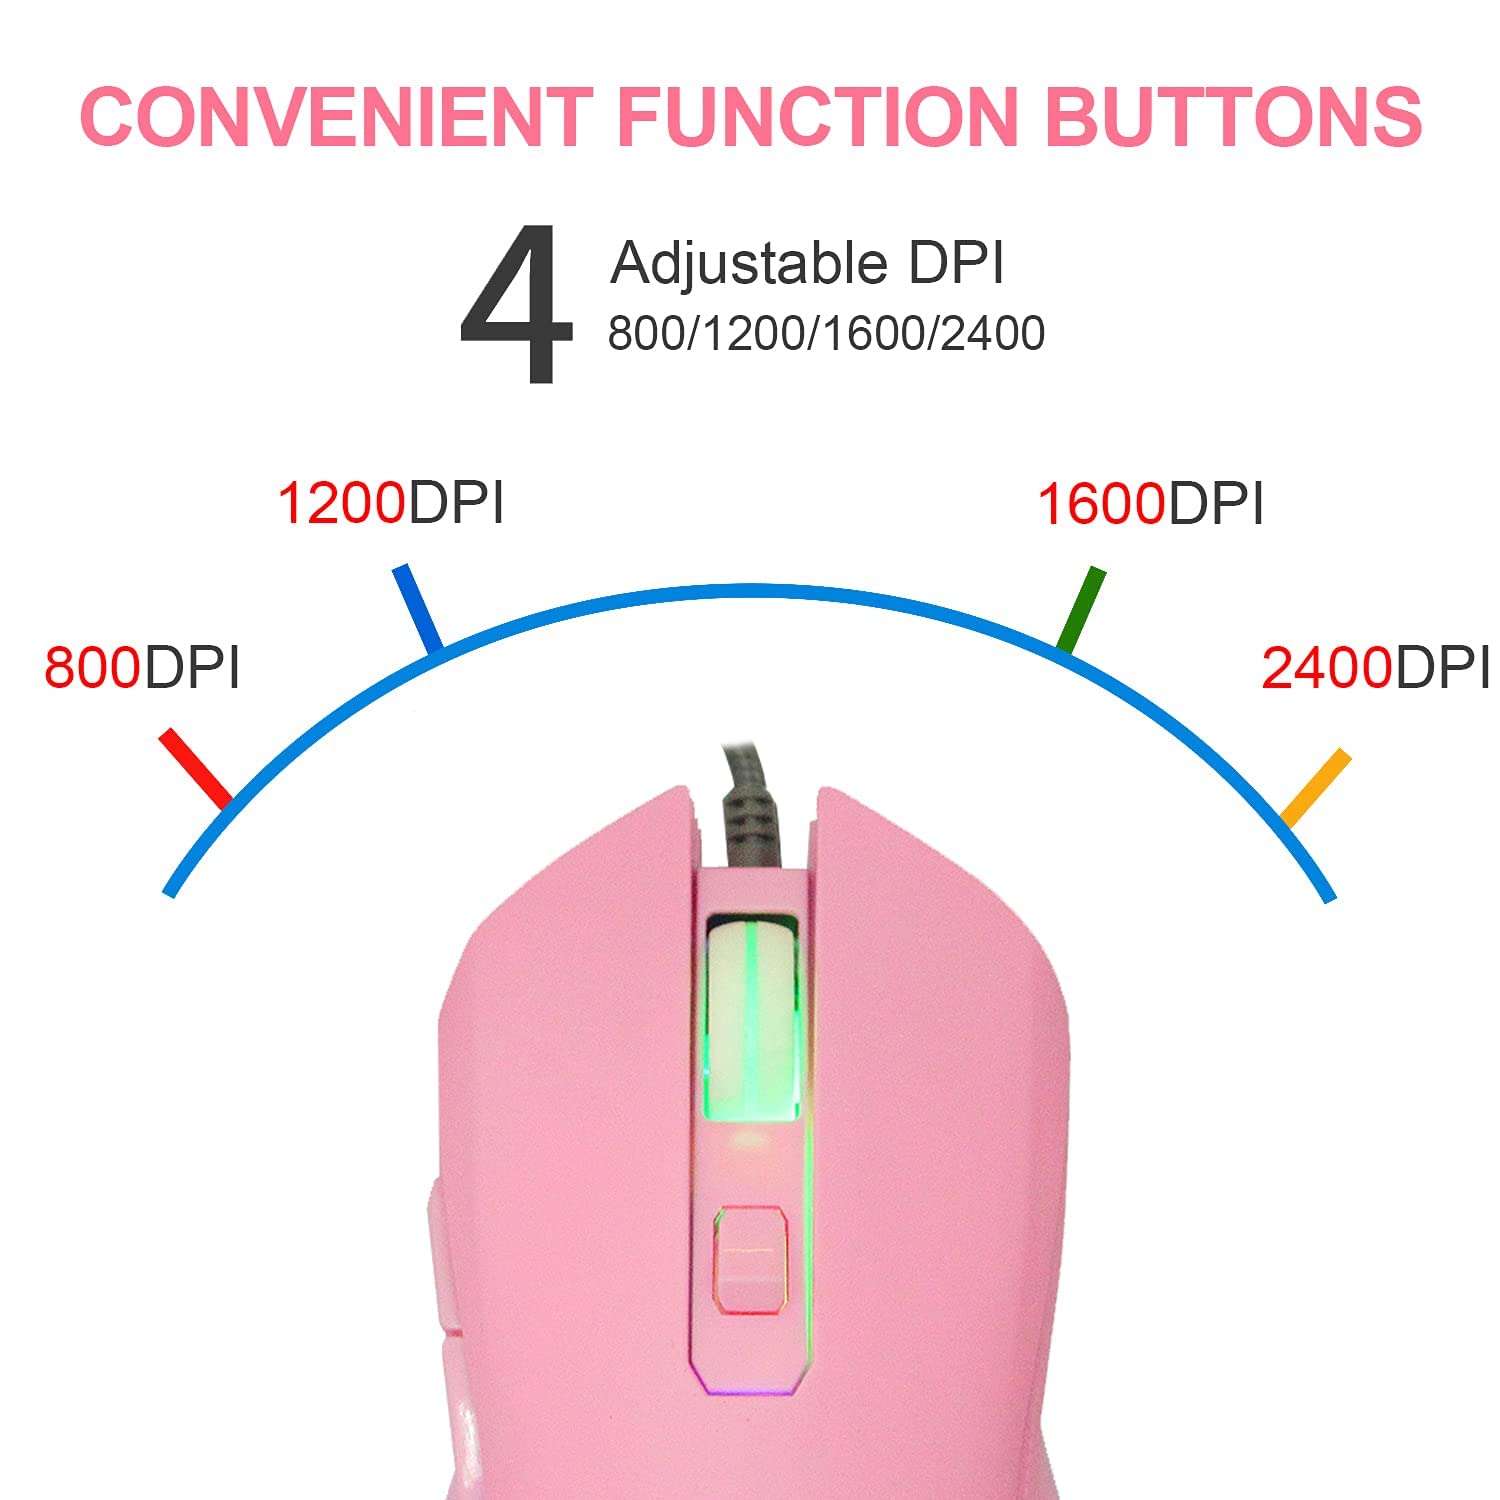 Huifen Wired USB C Gaming Mouse, Silent RGB Gaming Mice 7 Colors Backlit, 2400 DPI, Type C RGB Wired Mouse Gaming for Office Home PC and Notebook and All Type-C Device (Pink) …